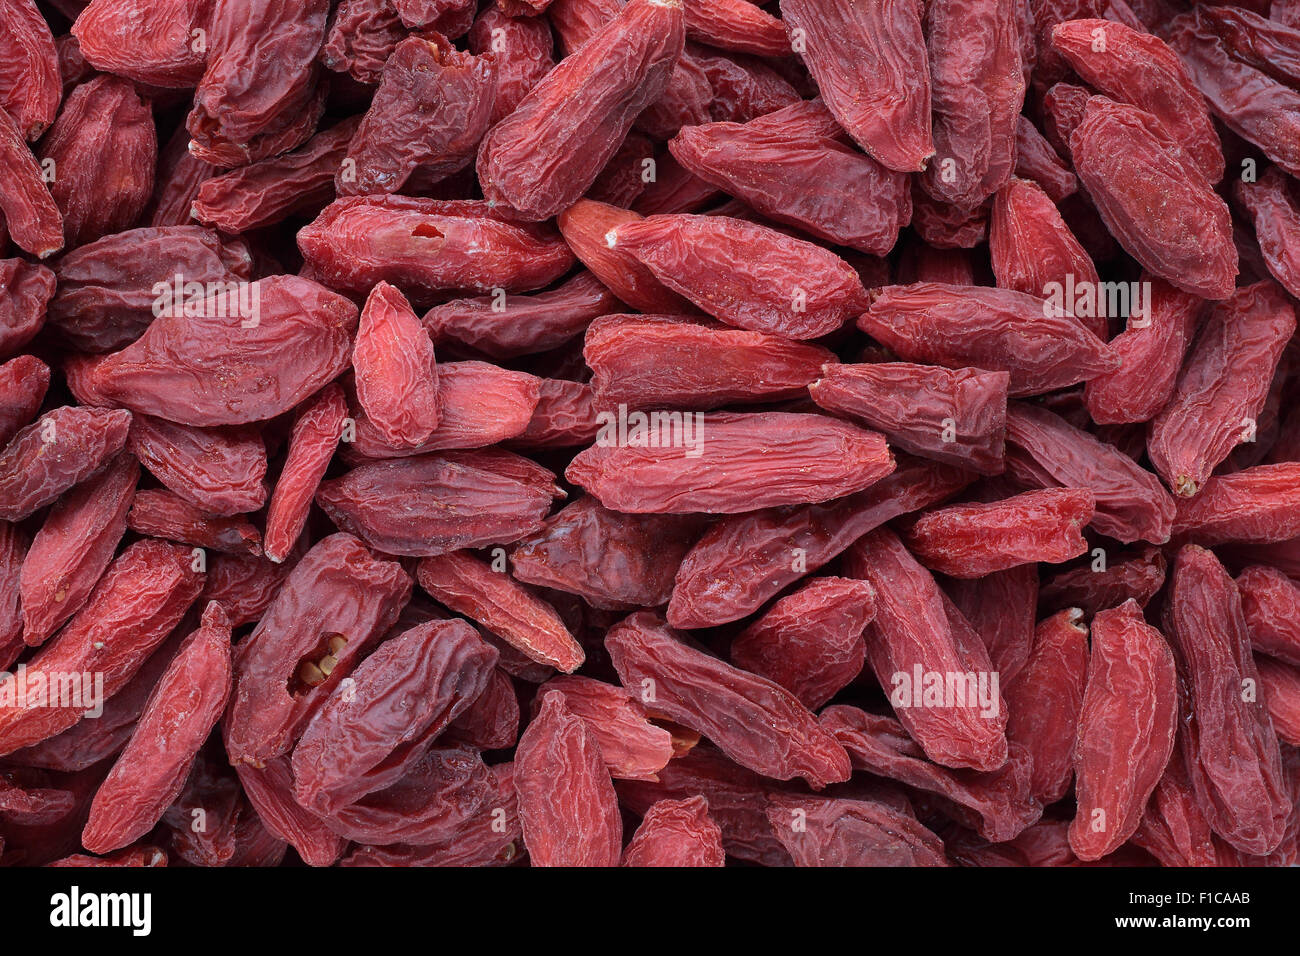 Goji berries, a fruit berry and medicinal plant Stock Photo